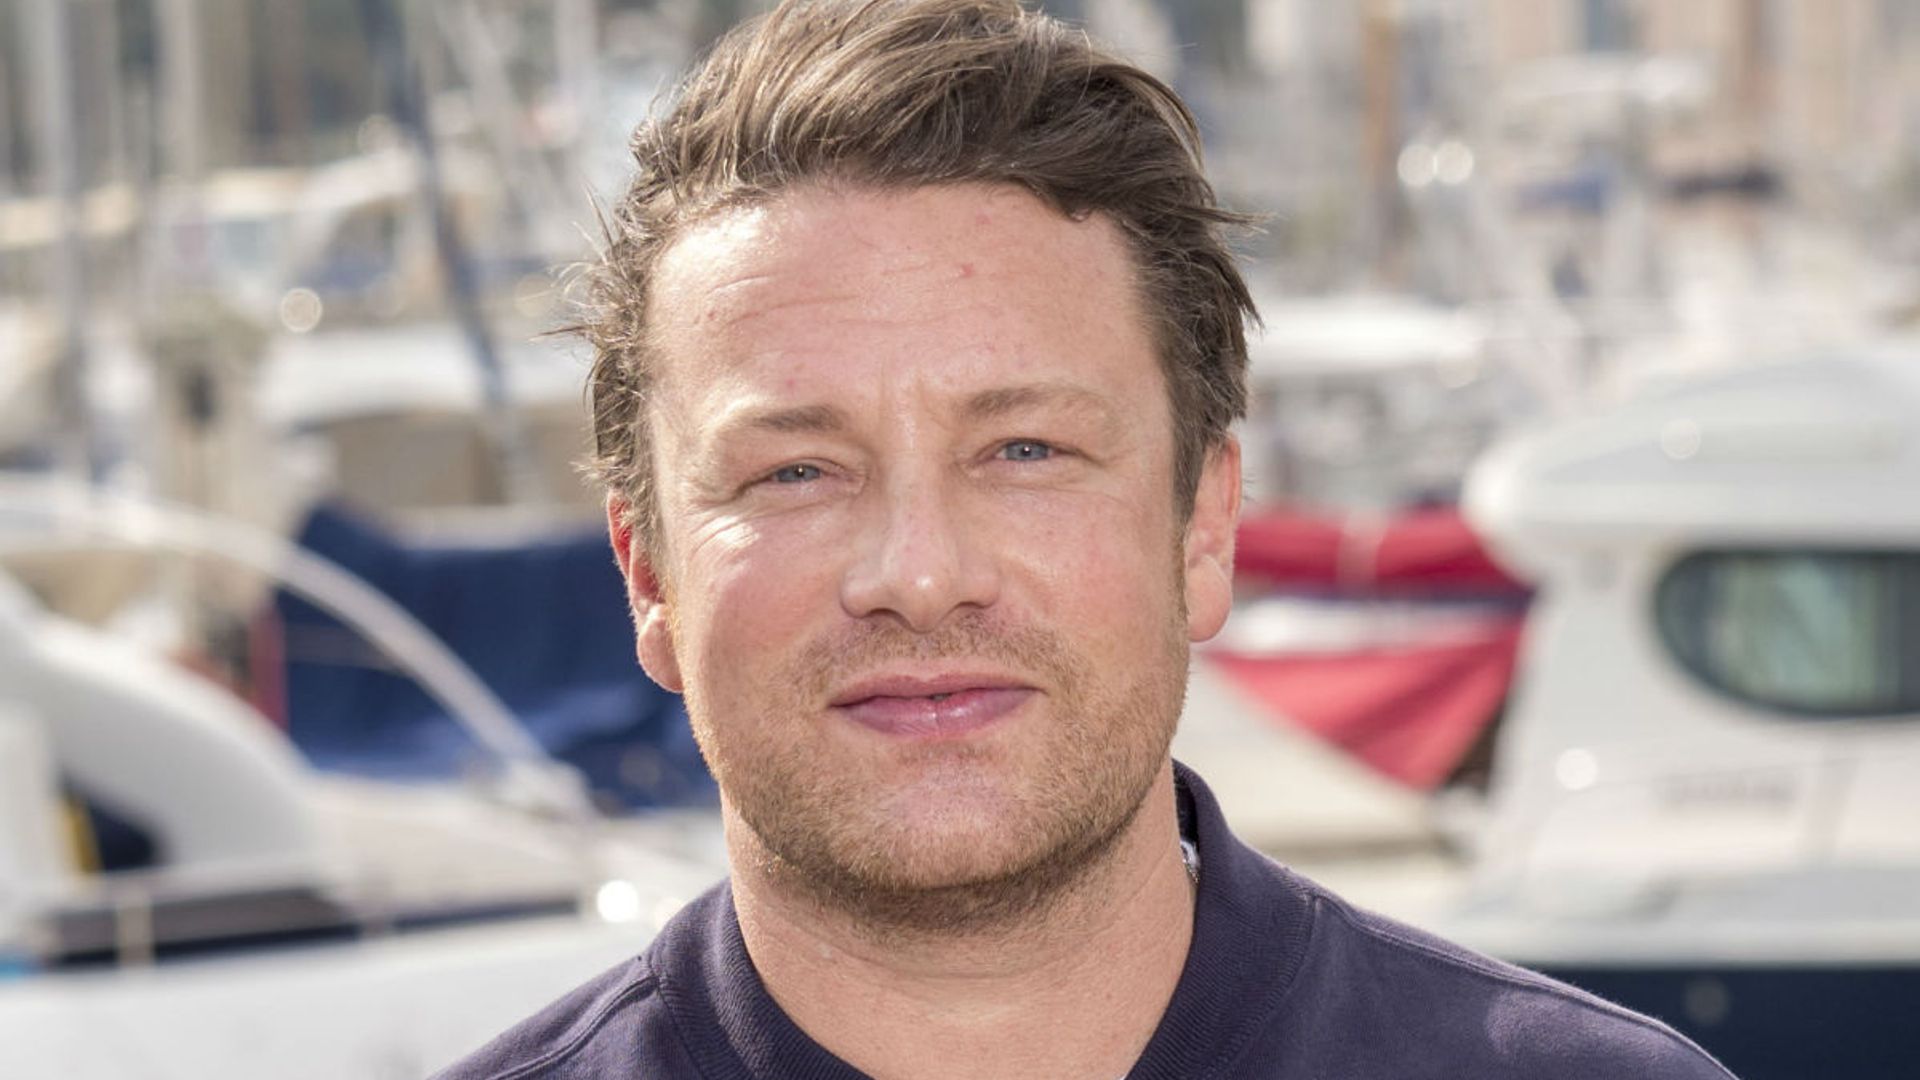 jamie oliver hits back at story